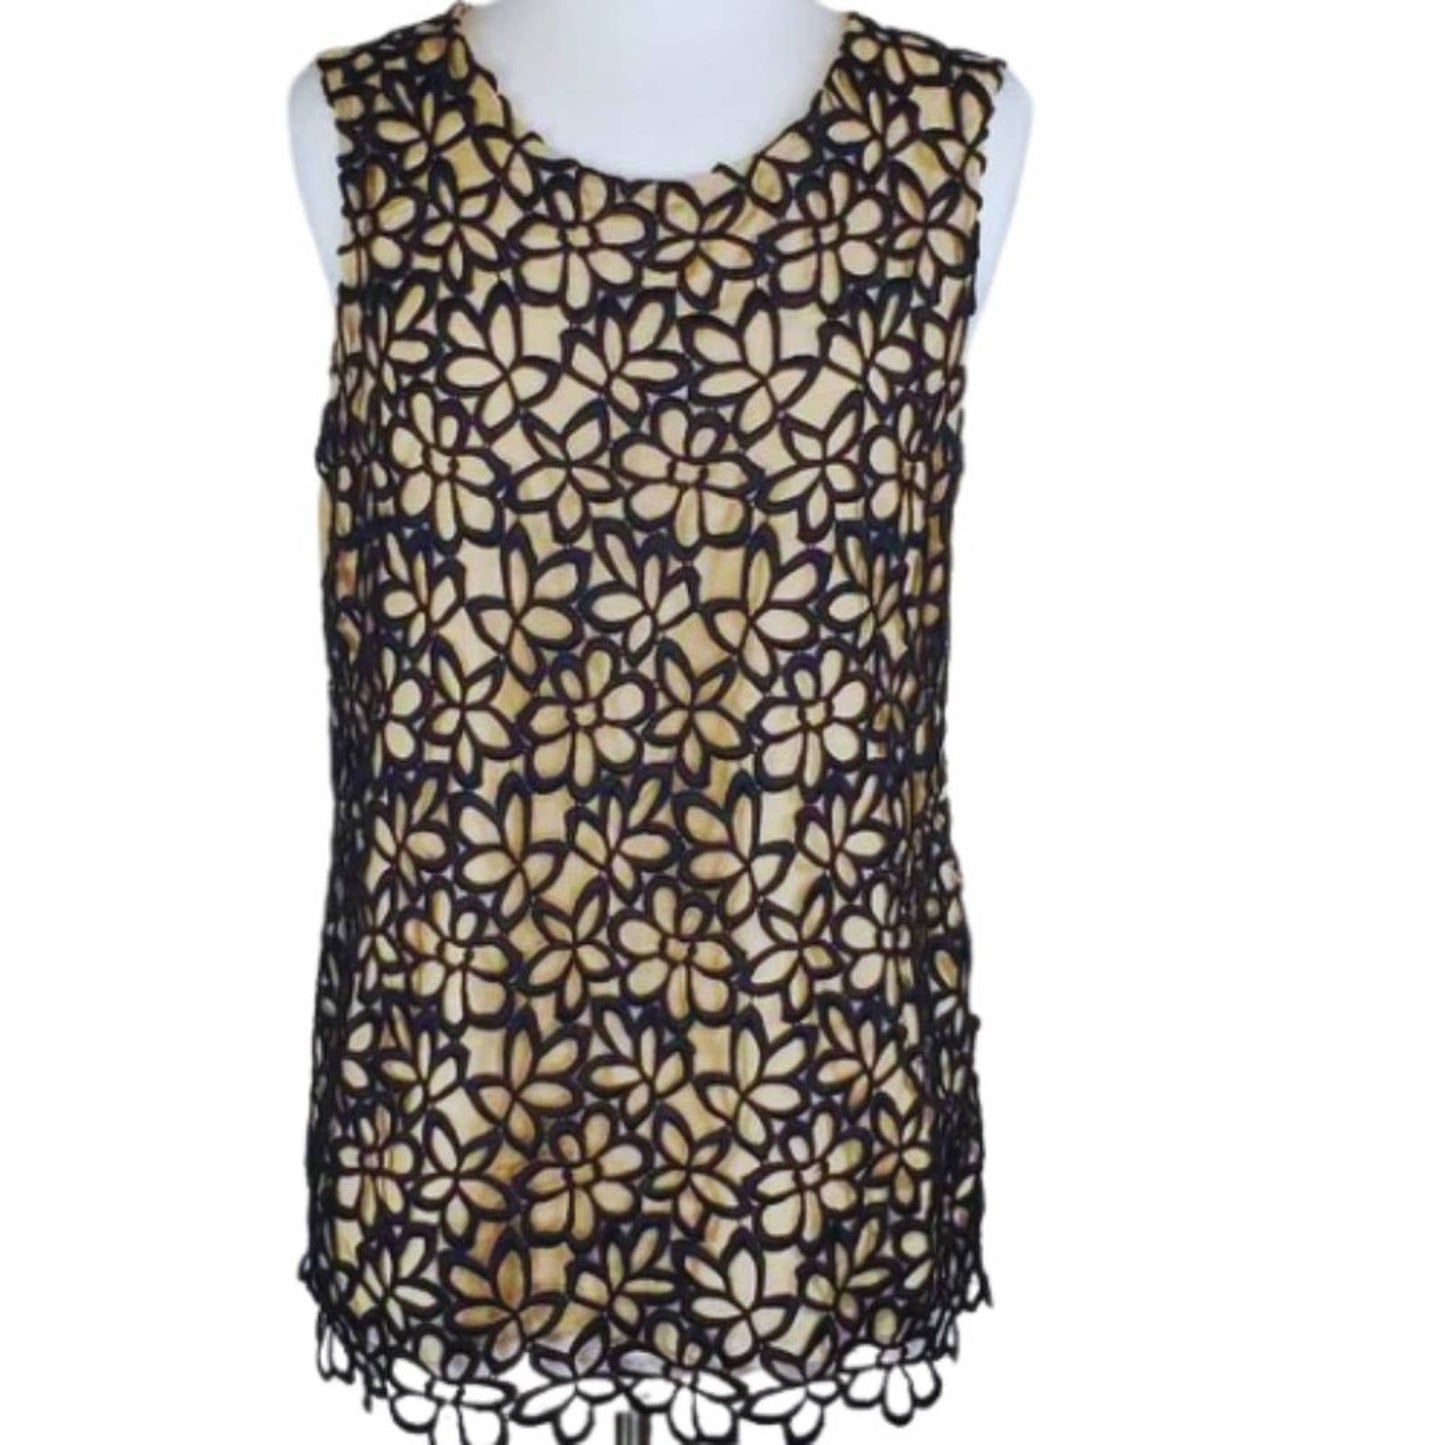 Lela Rose Collaboration Guipure Top in Tan and Black EUC Size XS